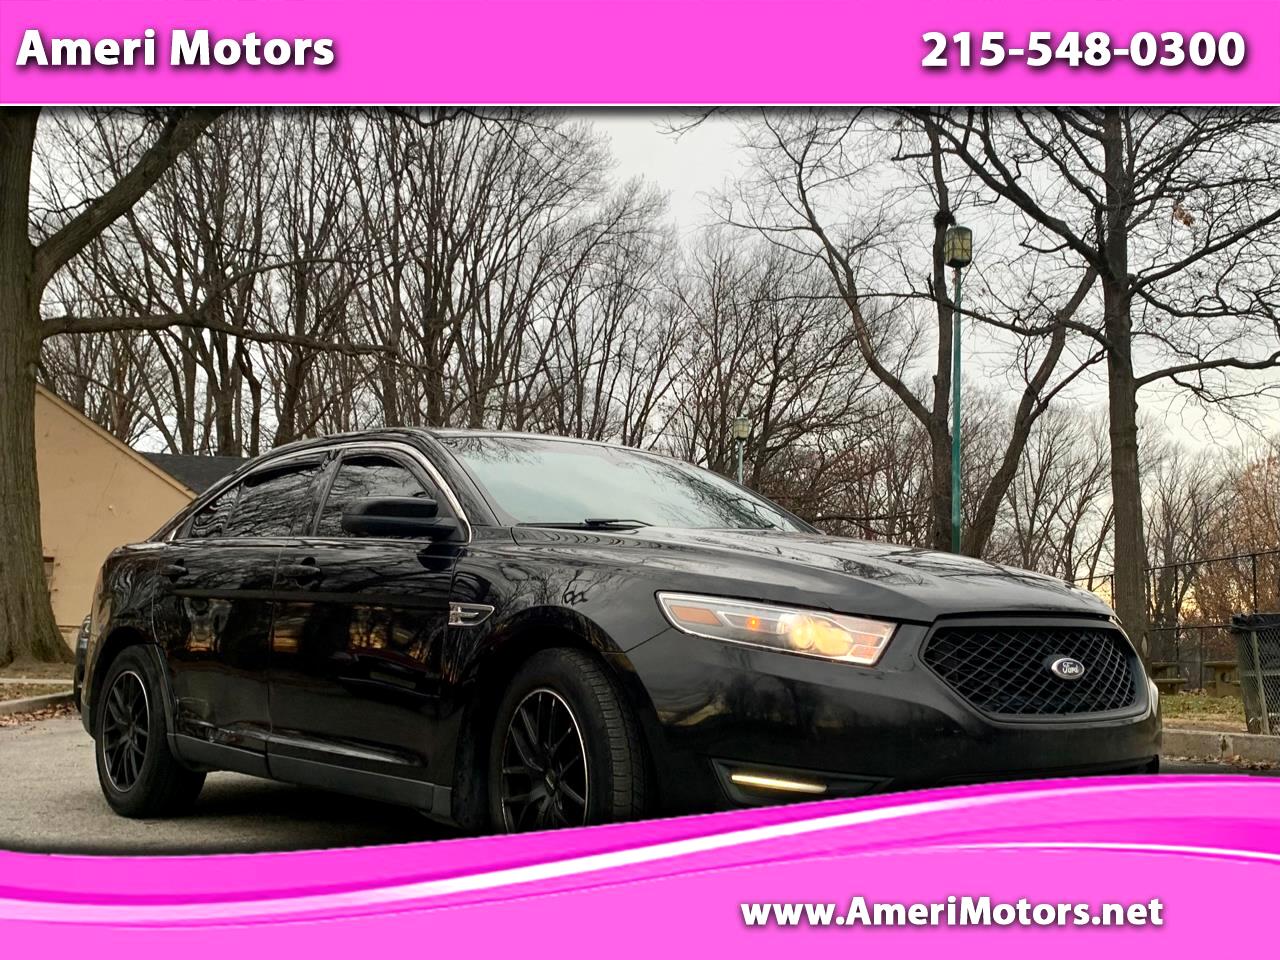 Ford Taurus 4dr Sdn SEL FWD 2013